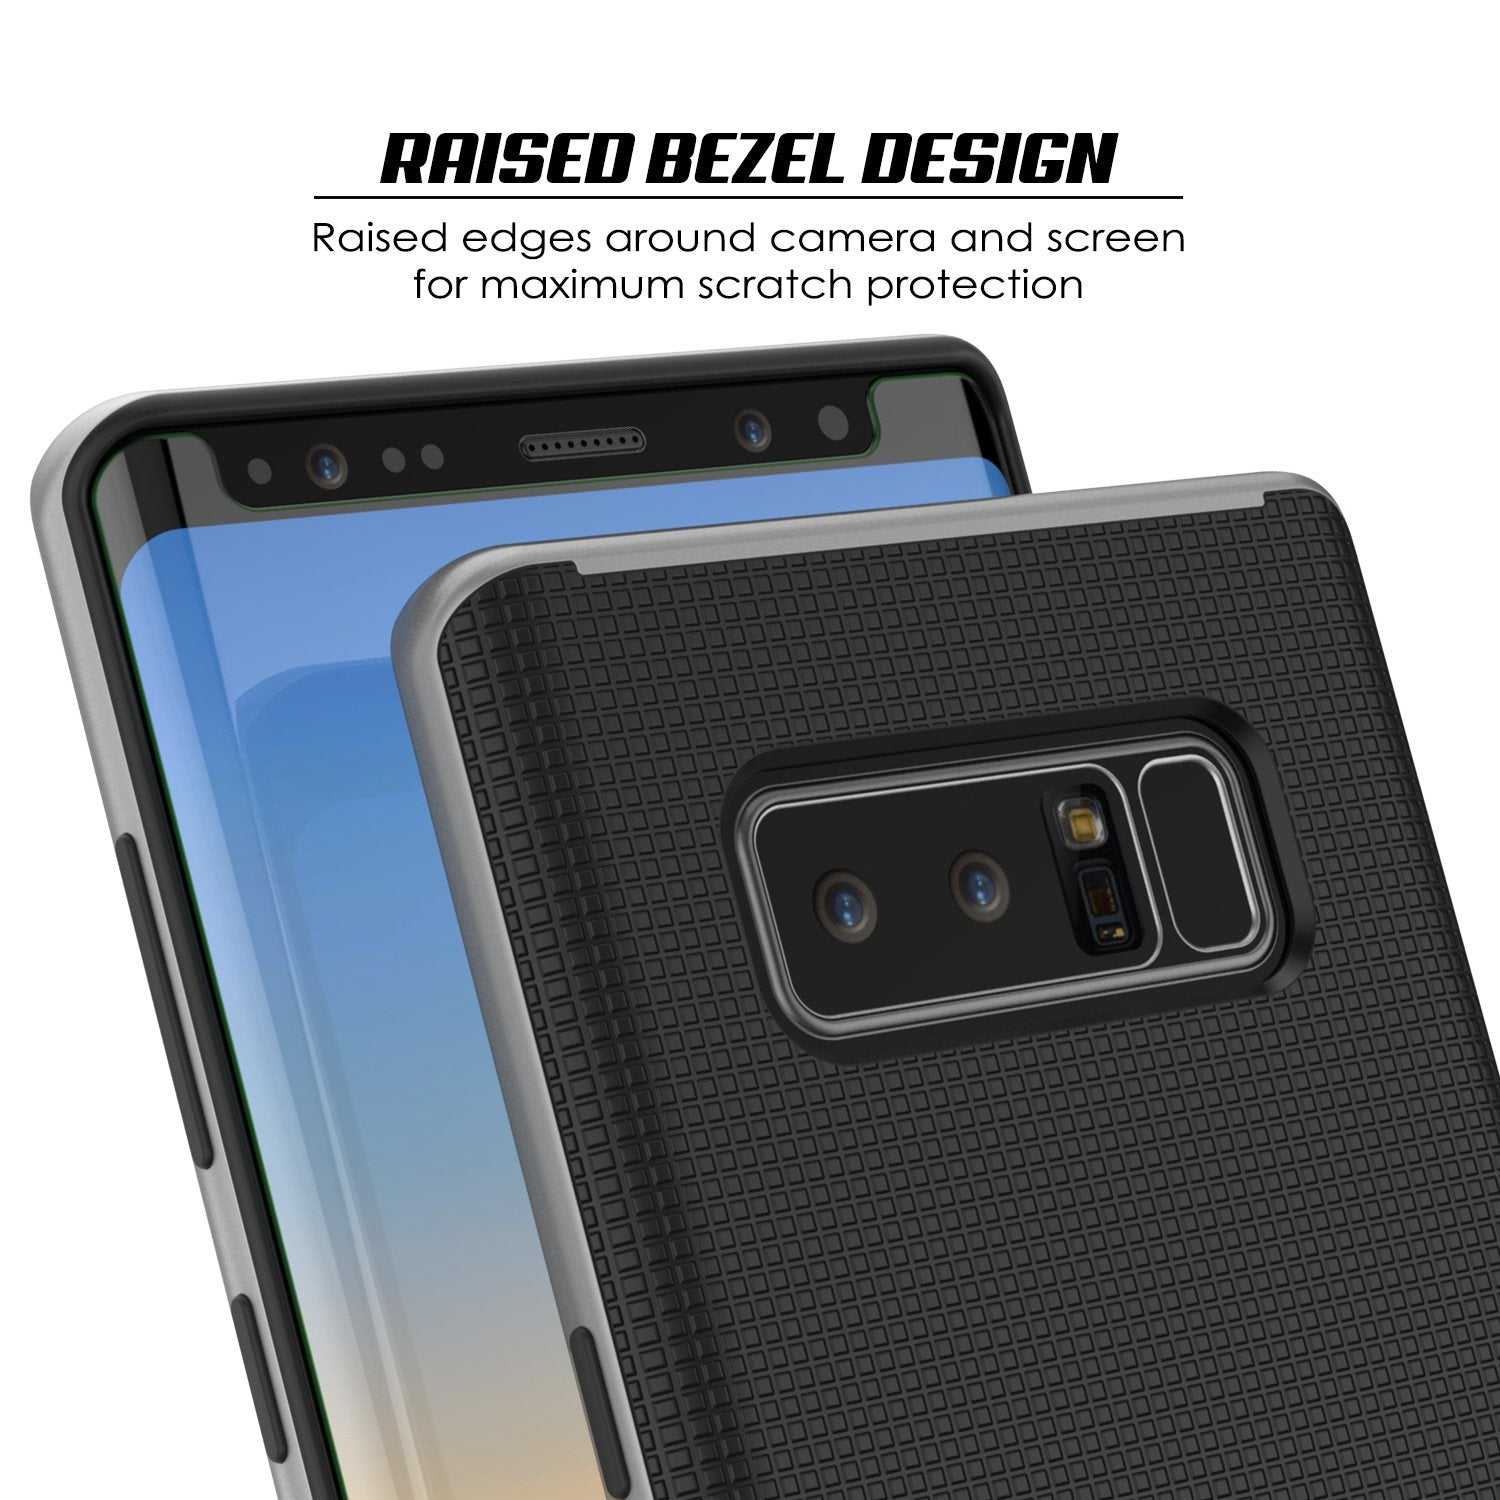 Galaxy Note 8 Screen/Shock Protective Dual Layer Case [Silver]